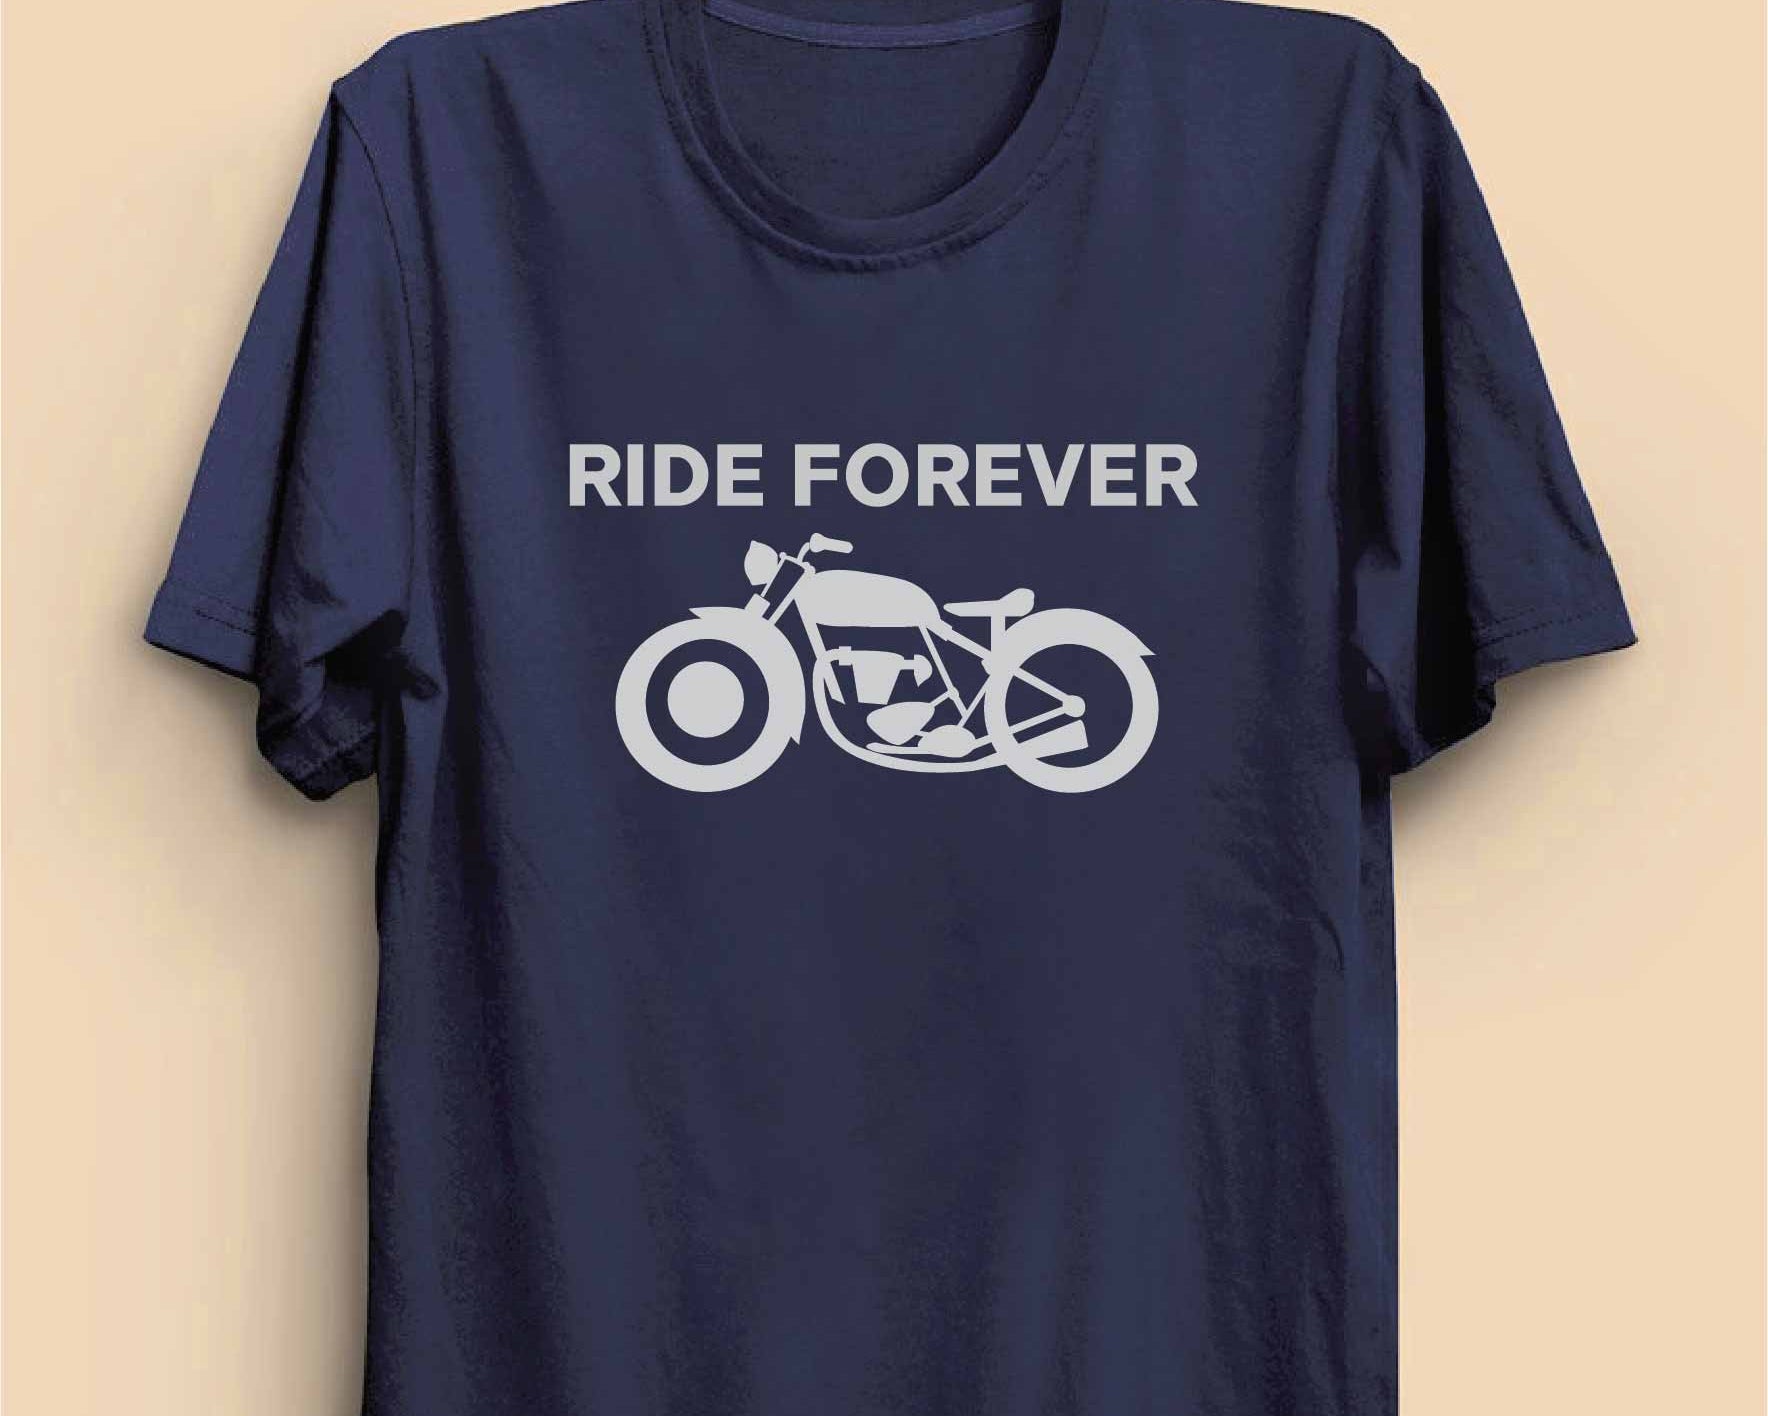 Ride Forever Reactr Tshirts For Men - Eyewearlabs